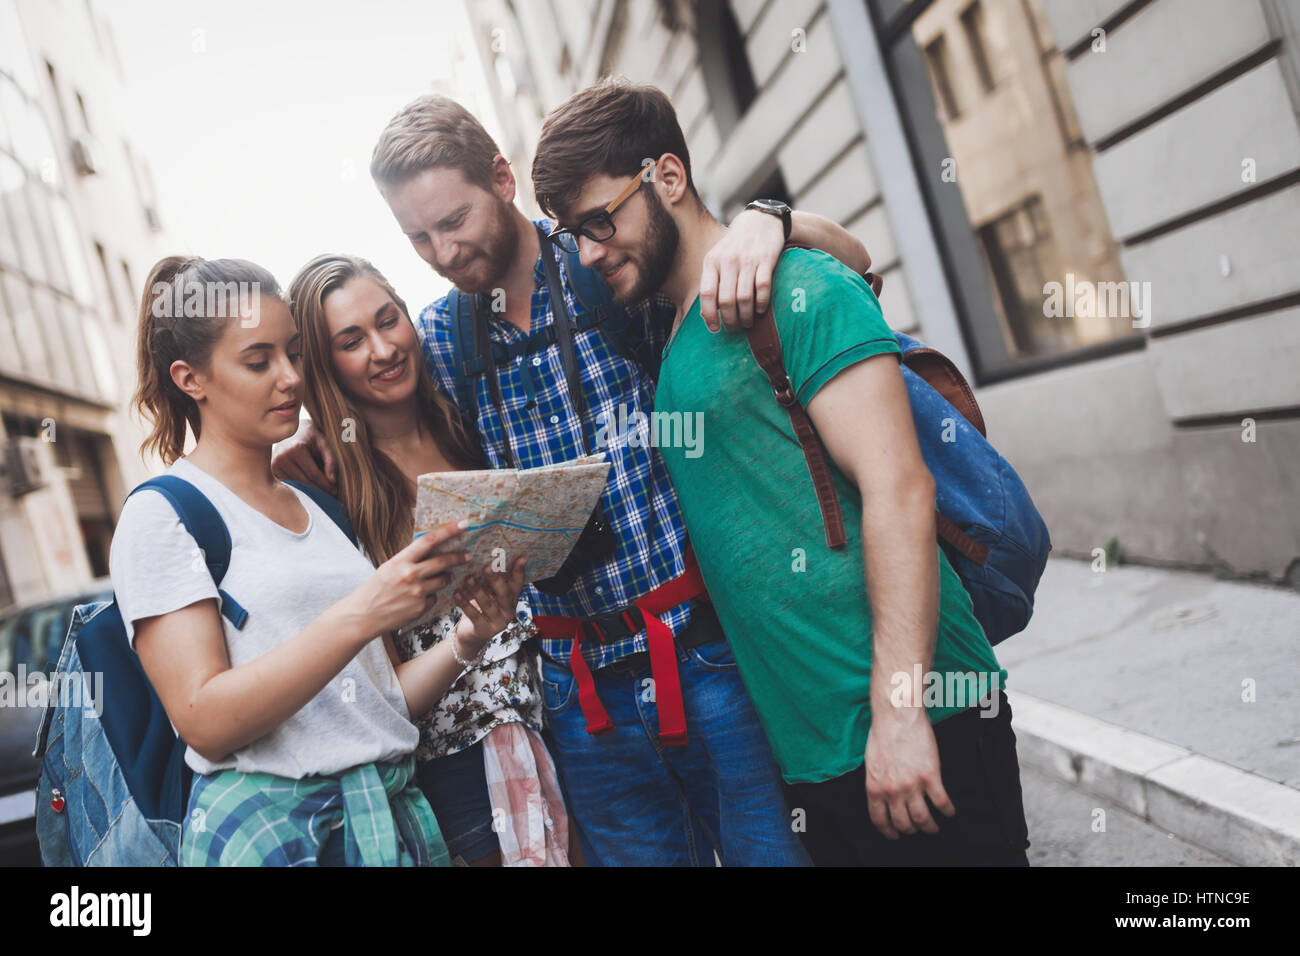 Happy tourists travelling and sightseeing city Stock Photo